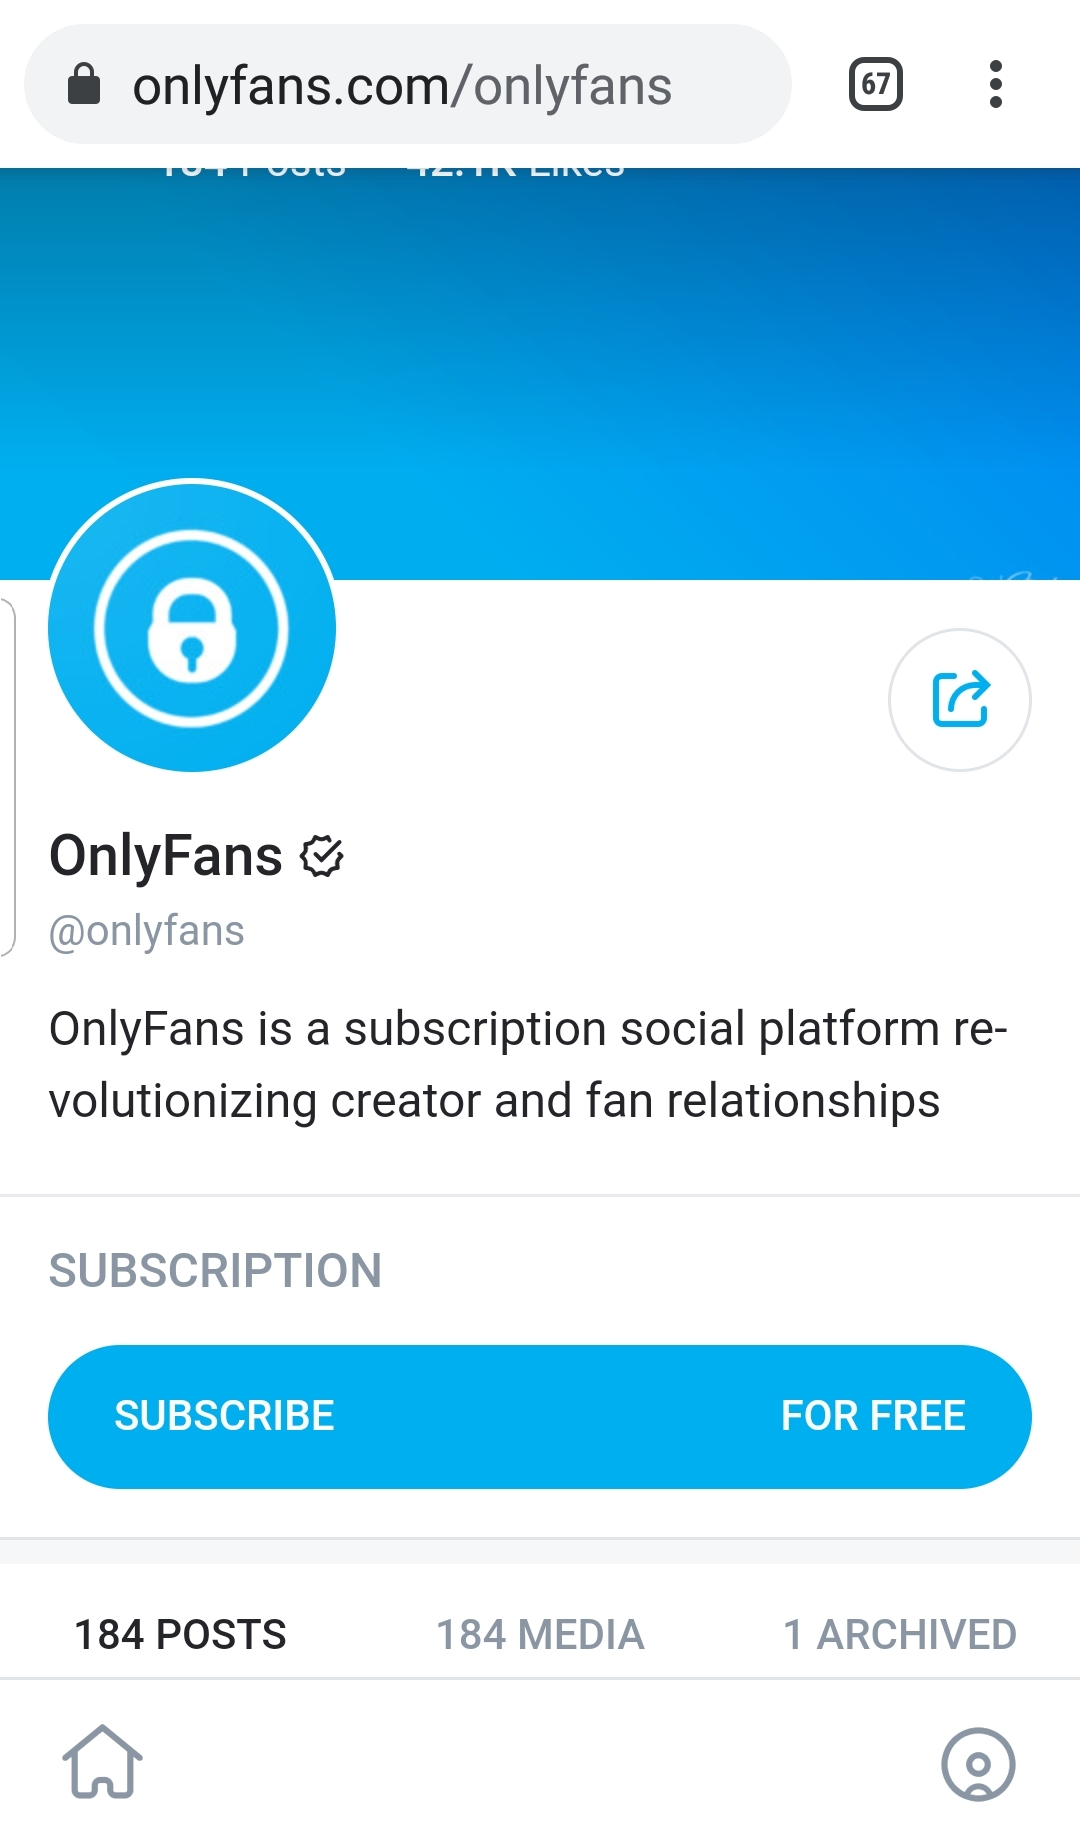 Can you cancel a subscription on onlyfans